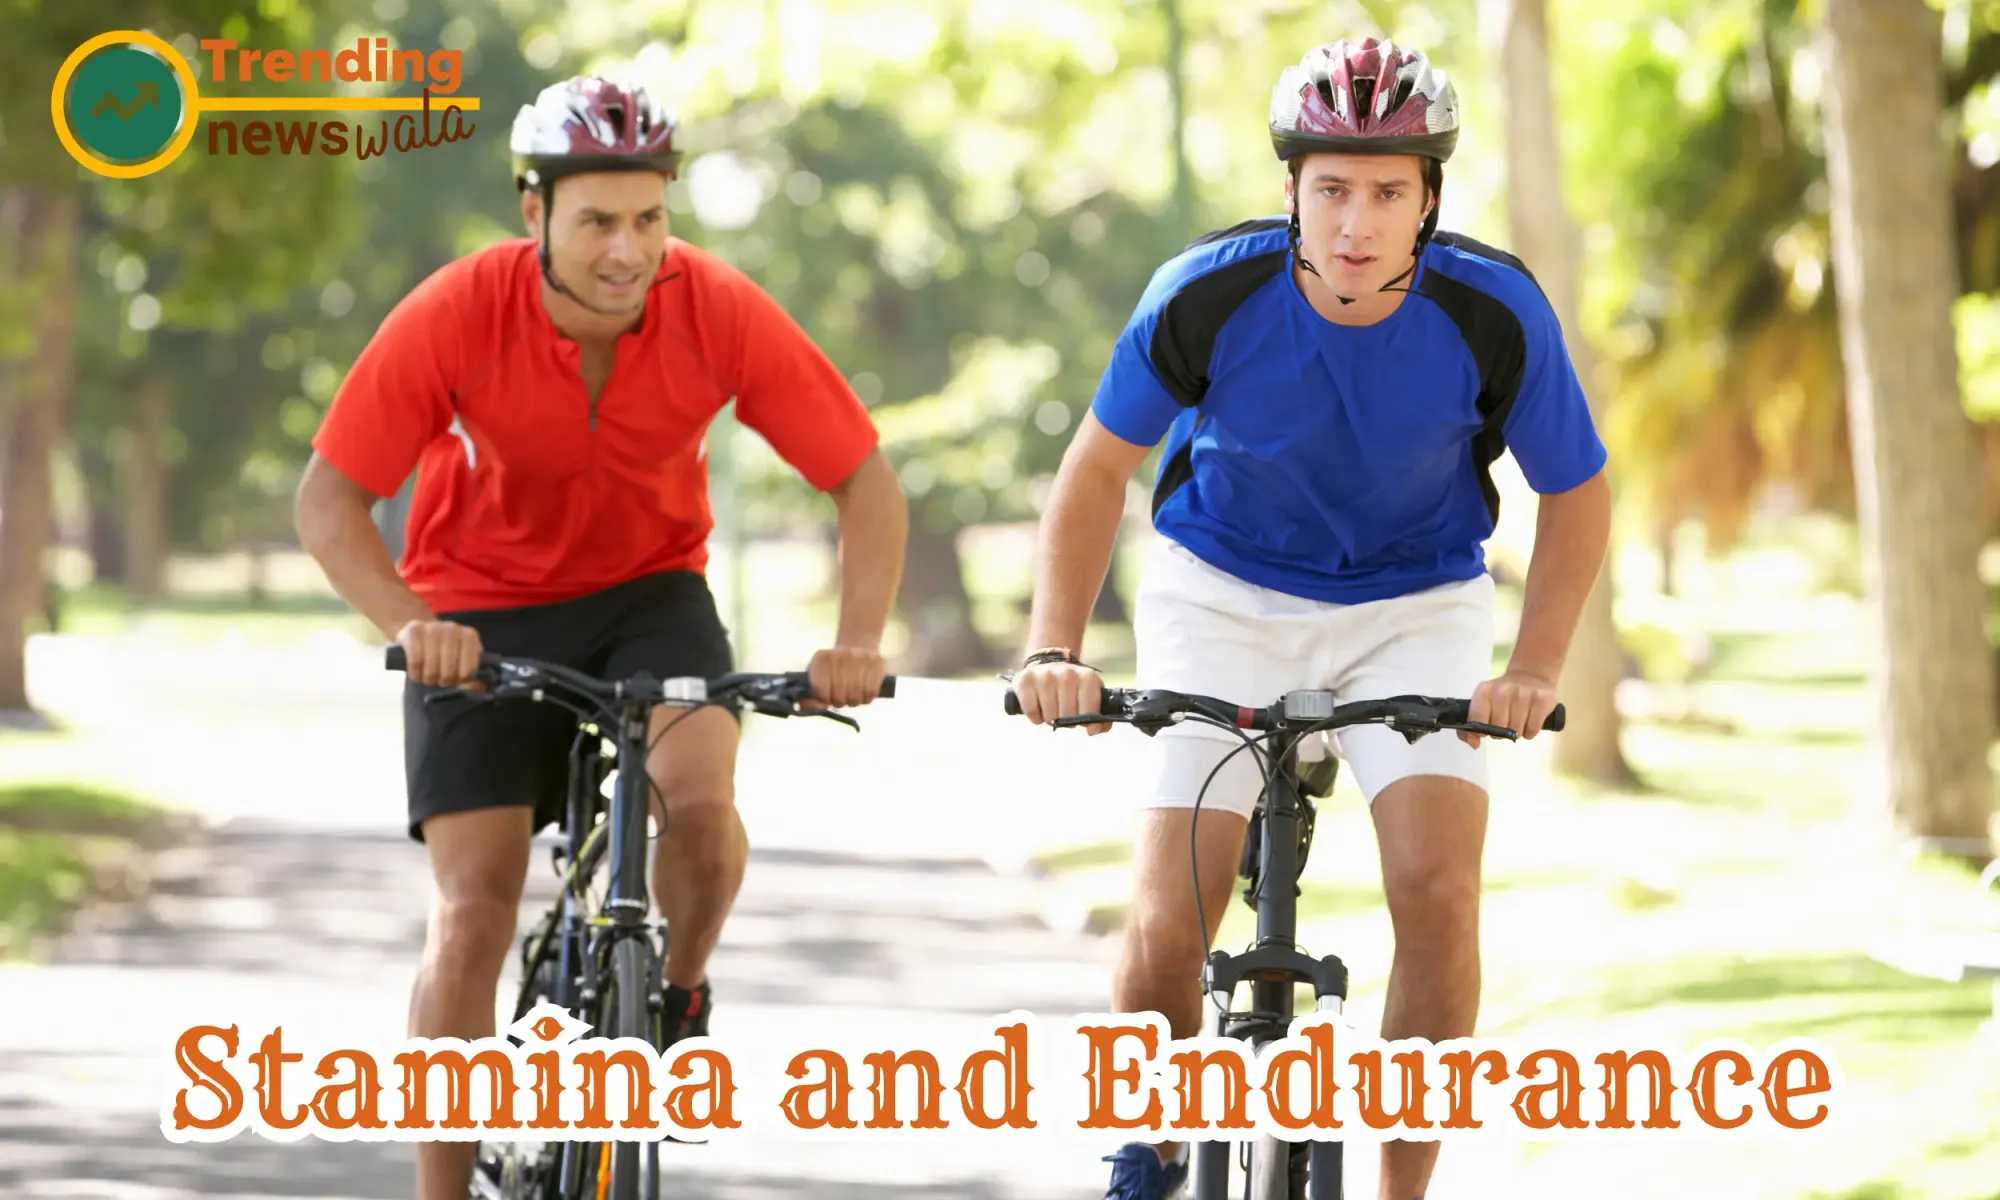 Increased stamina and endurance through cycling involve specific physiological